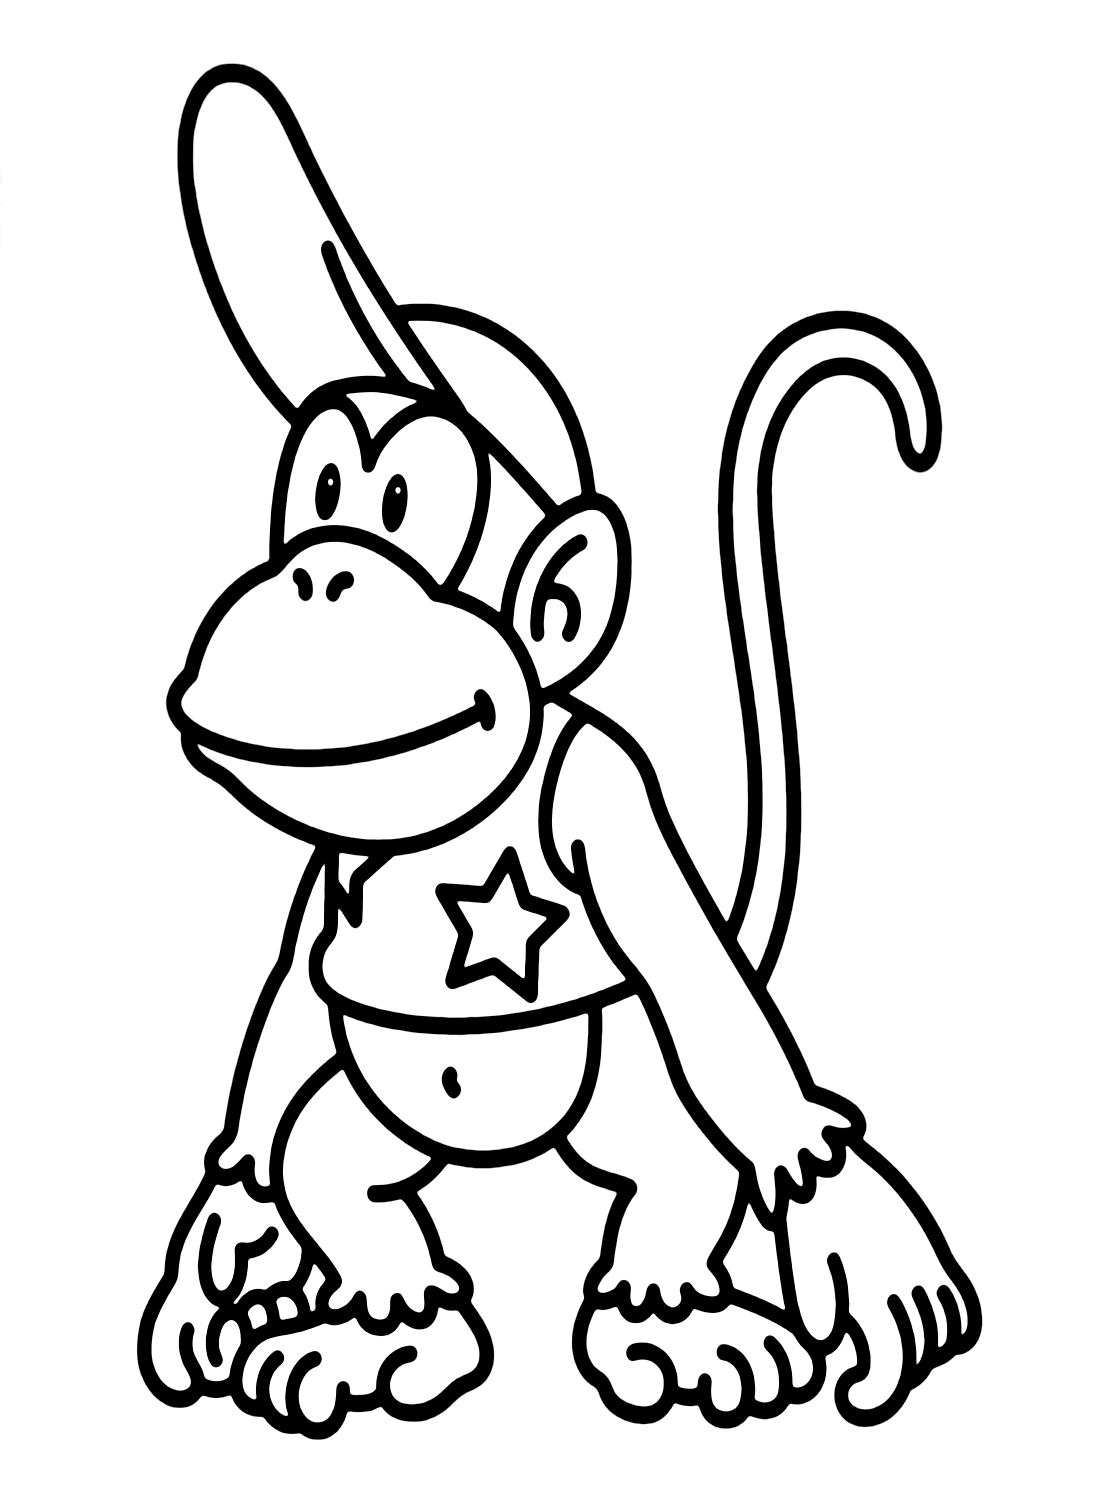 Diddy Kong fofo de Diddy Kong